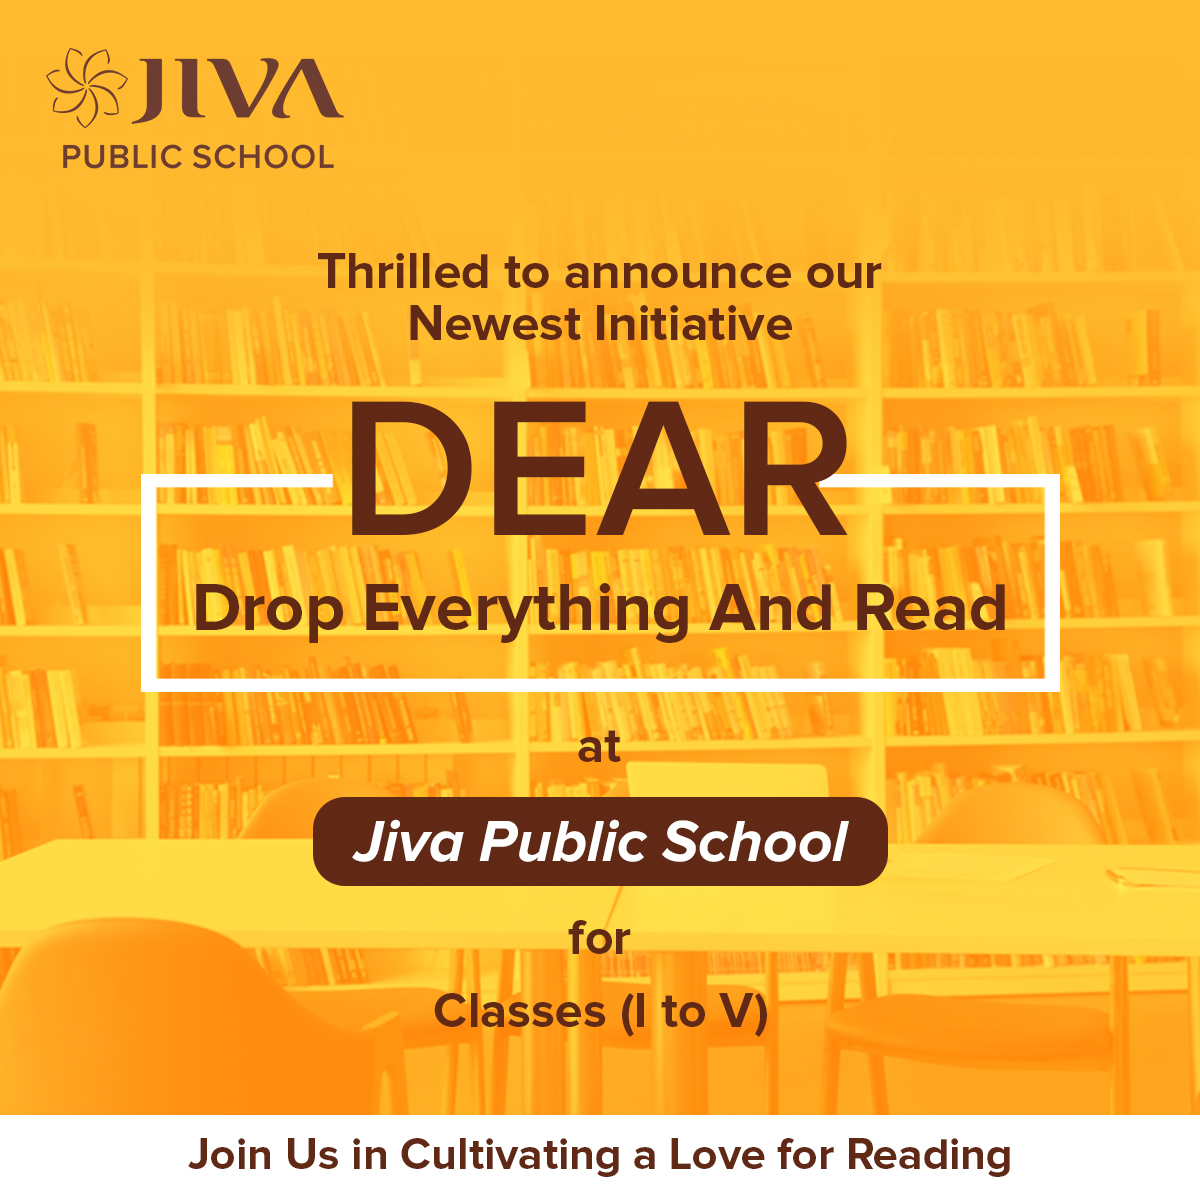 We’re excited to announce DEAR program that will help cultivate reading skills in children. Look forward to your participation to make this program successful.

#NewProgramLaunch #NewProgram #DEAR #dropeverythingandread #reading #announcement #jivapublicschool #motivatingreading